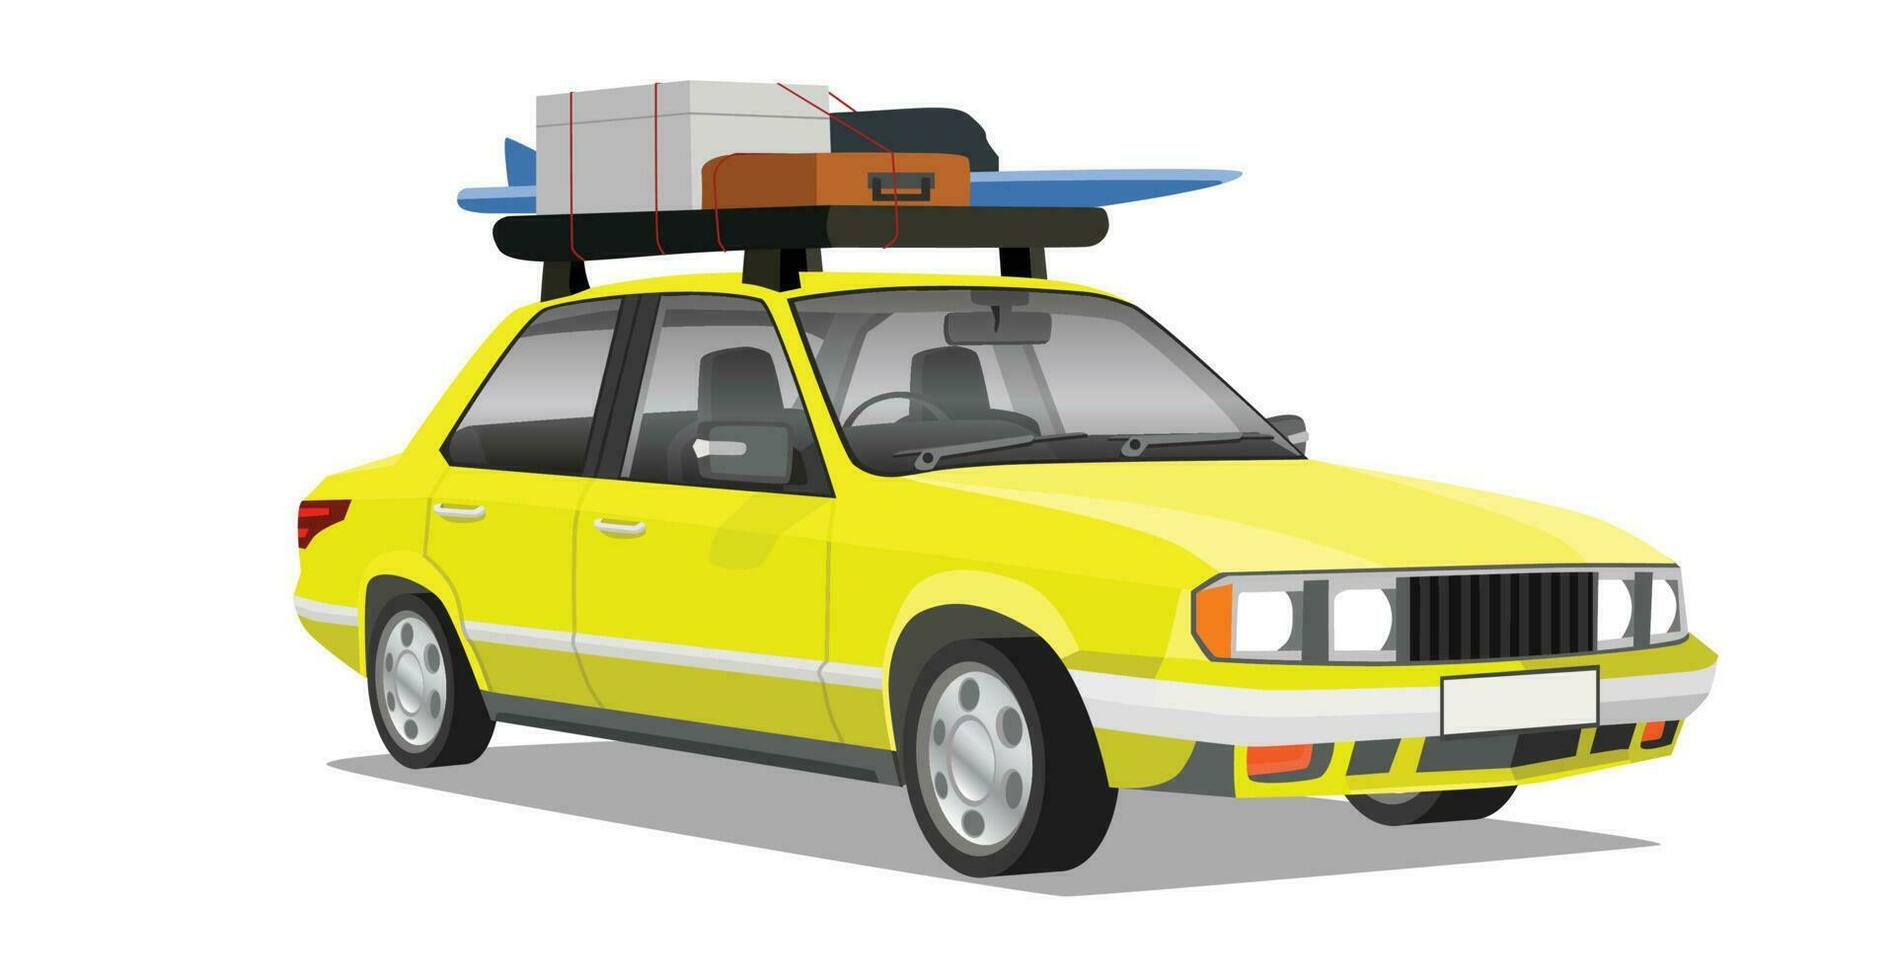 Obejct of classic car yellow color can view interior. inside with steering wheel, console with seat. On roof of car with rack packing luggage for traveling. on isolated white background. vector